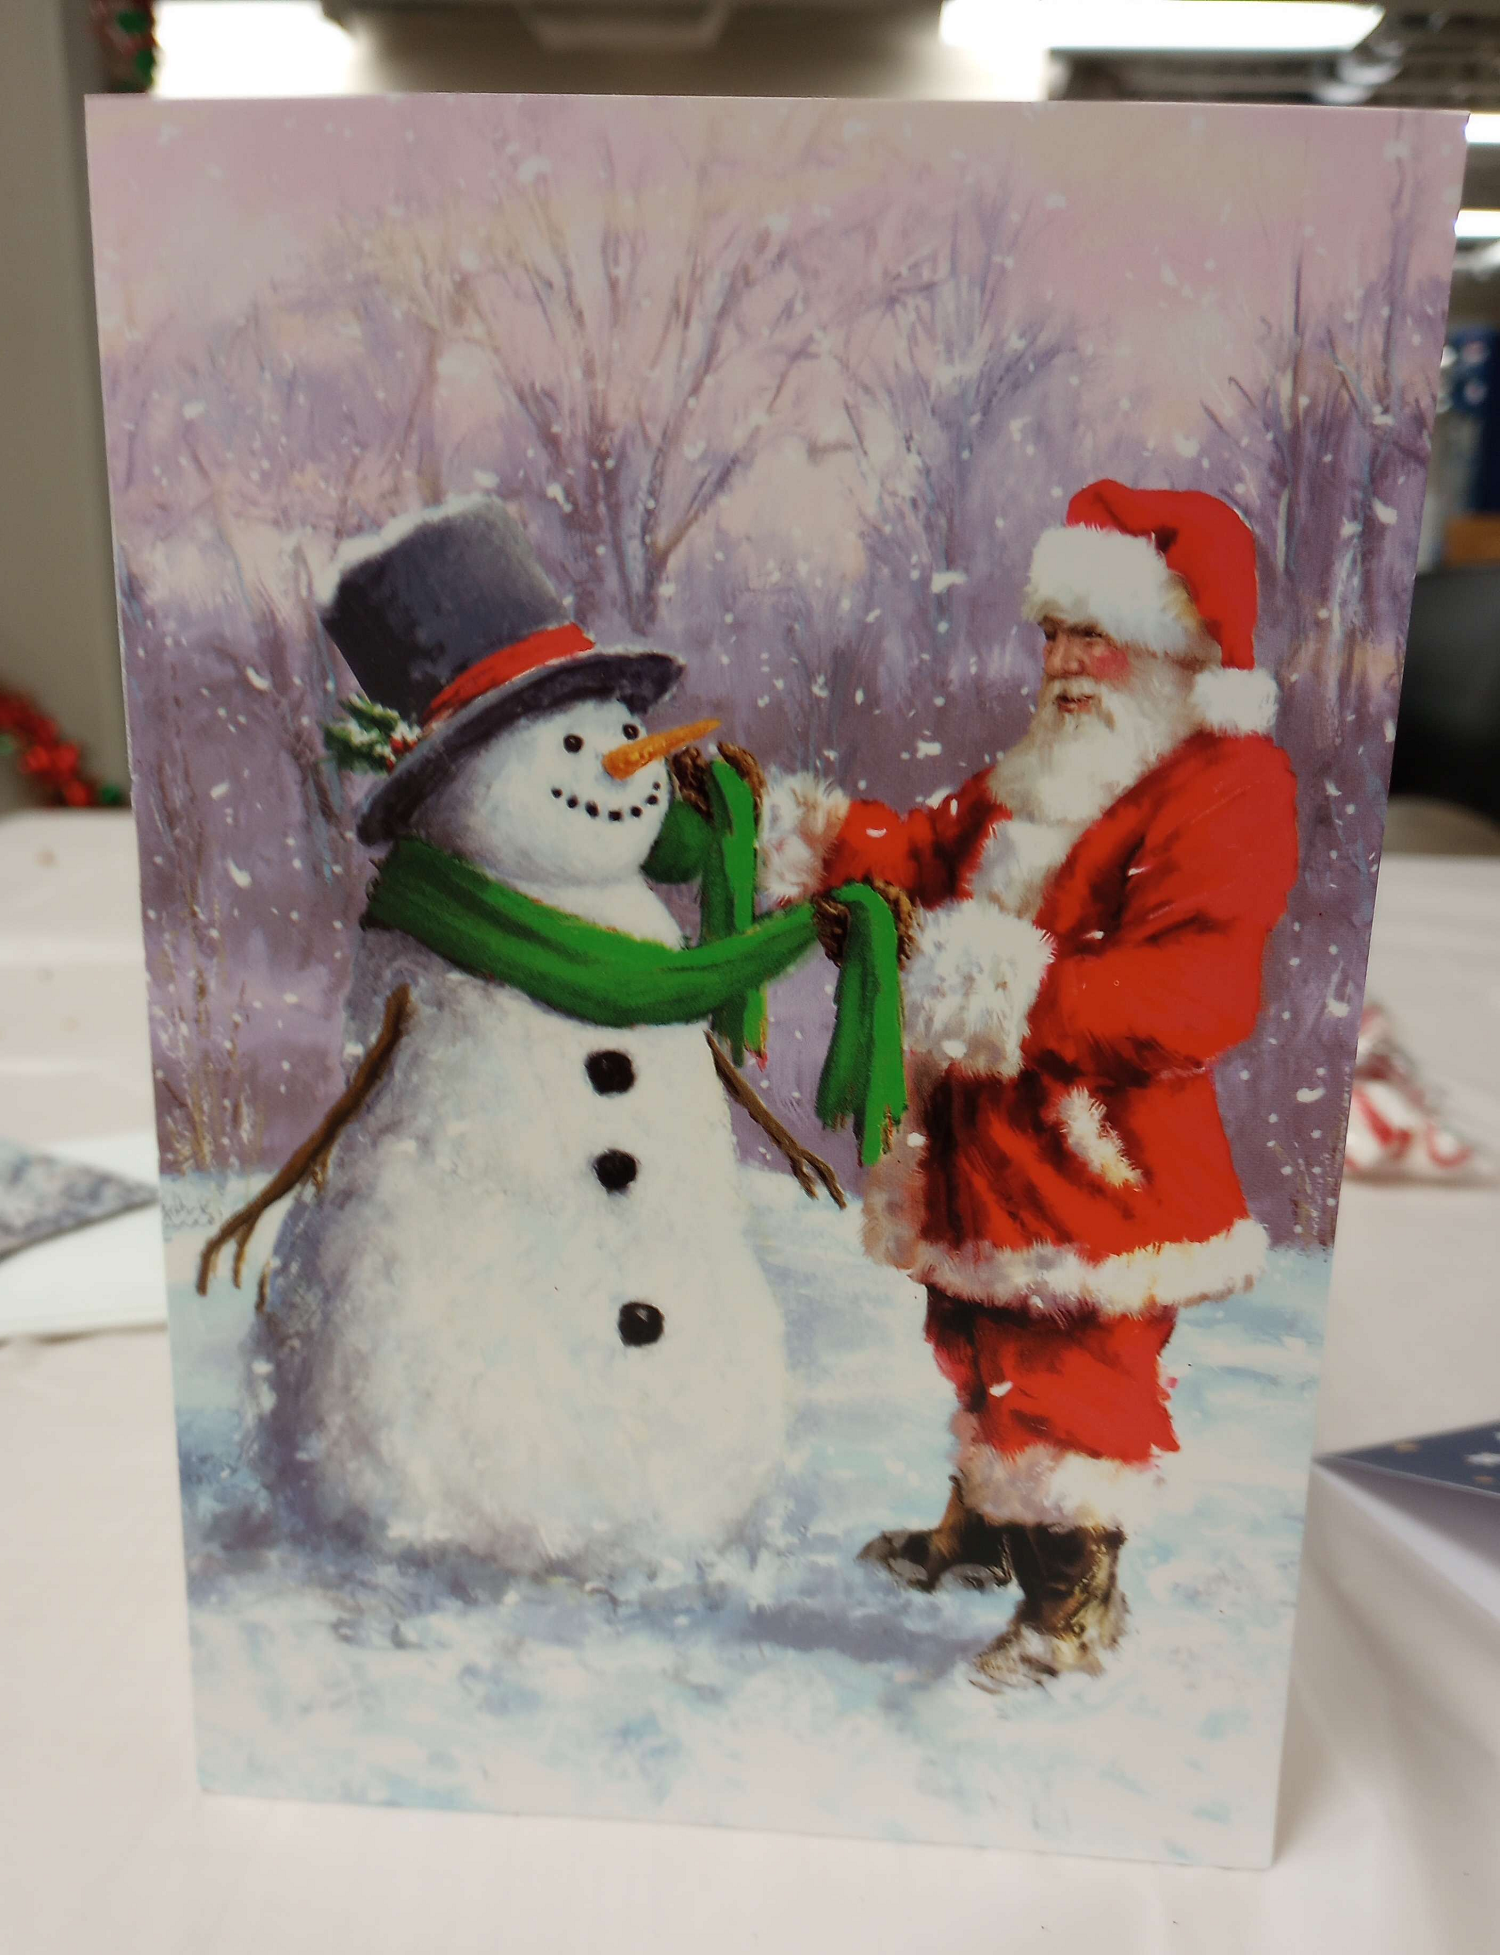 A rather svelte Santa is seen wrapping a scarf around a snowman.